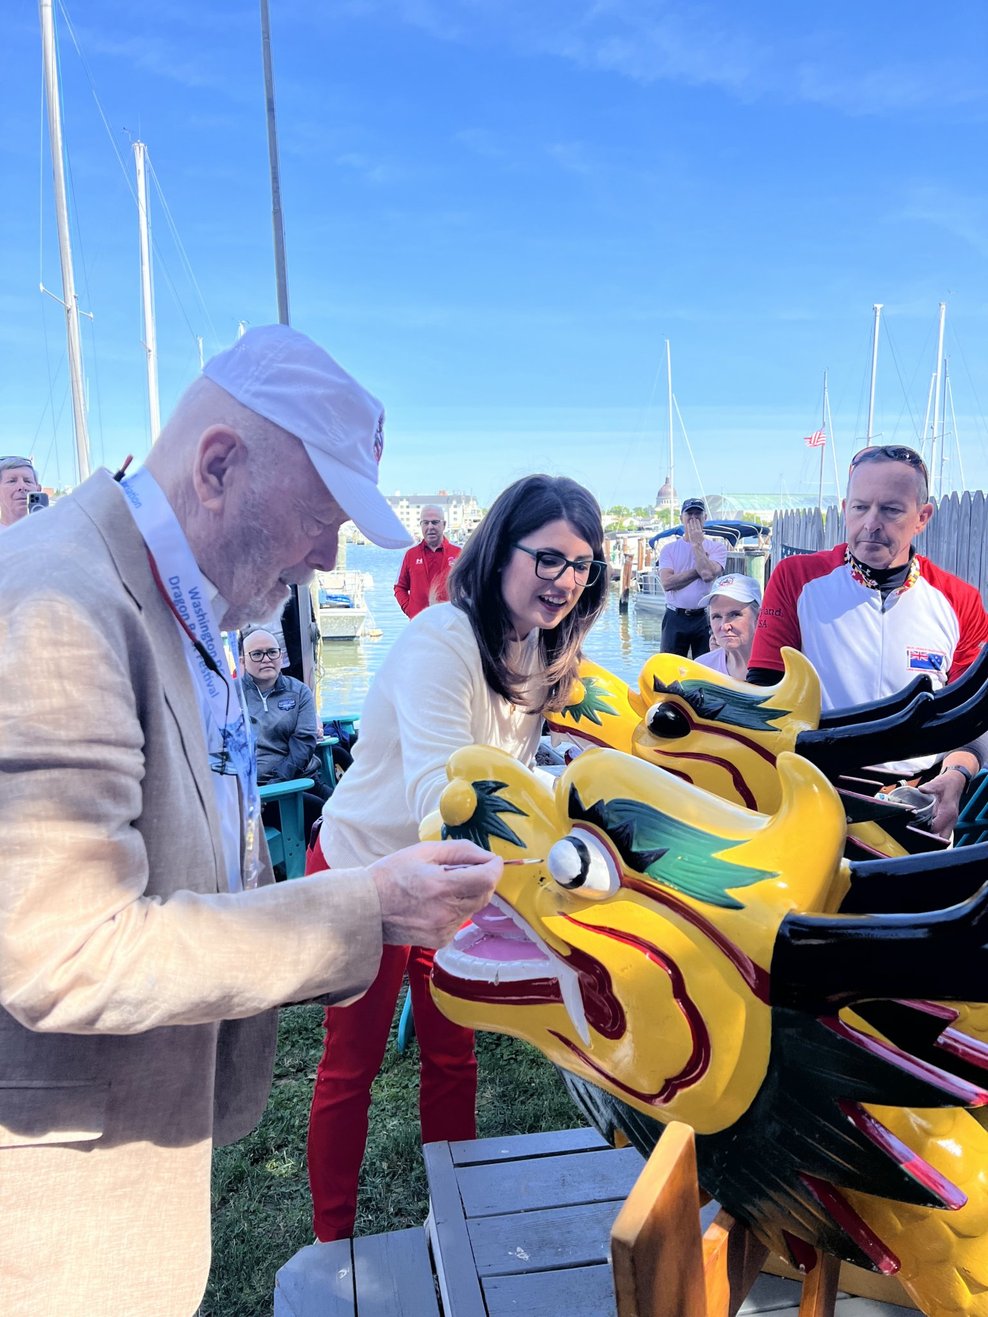 Founder Mike Ashford and Senator Sarah Elfreth paint the dragons' eyes at the Awaken the Dragon Ceremony in May 2023